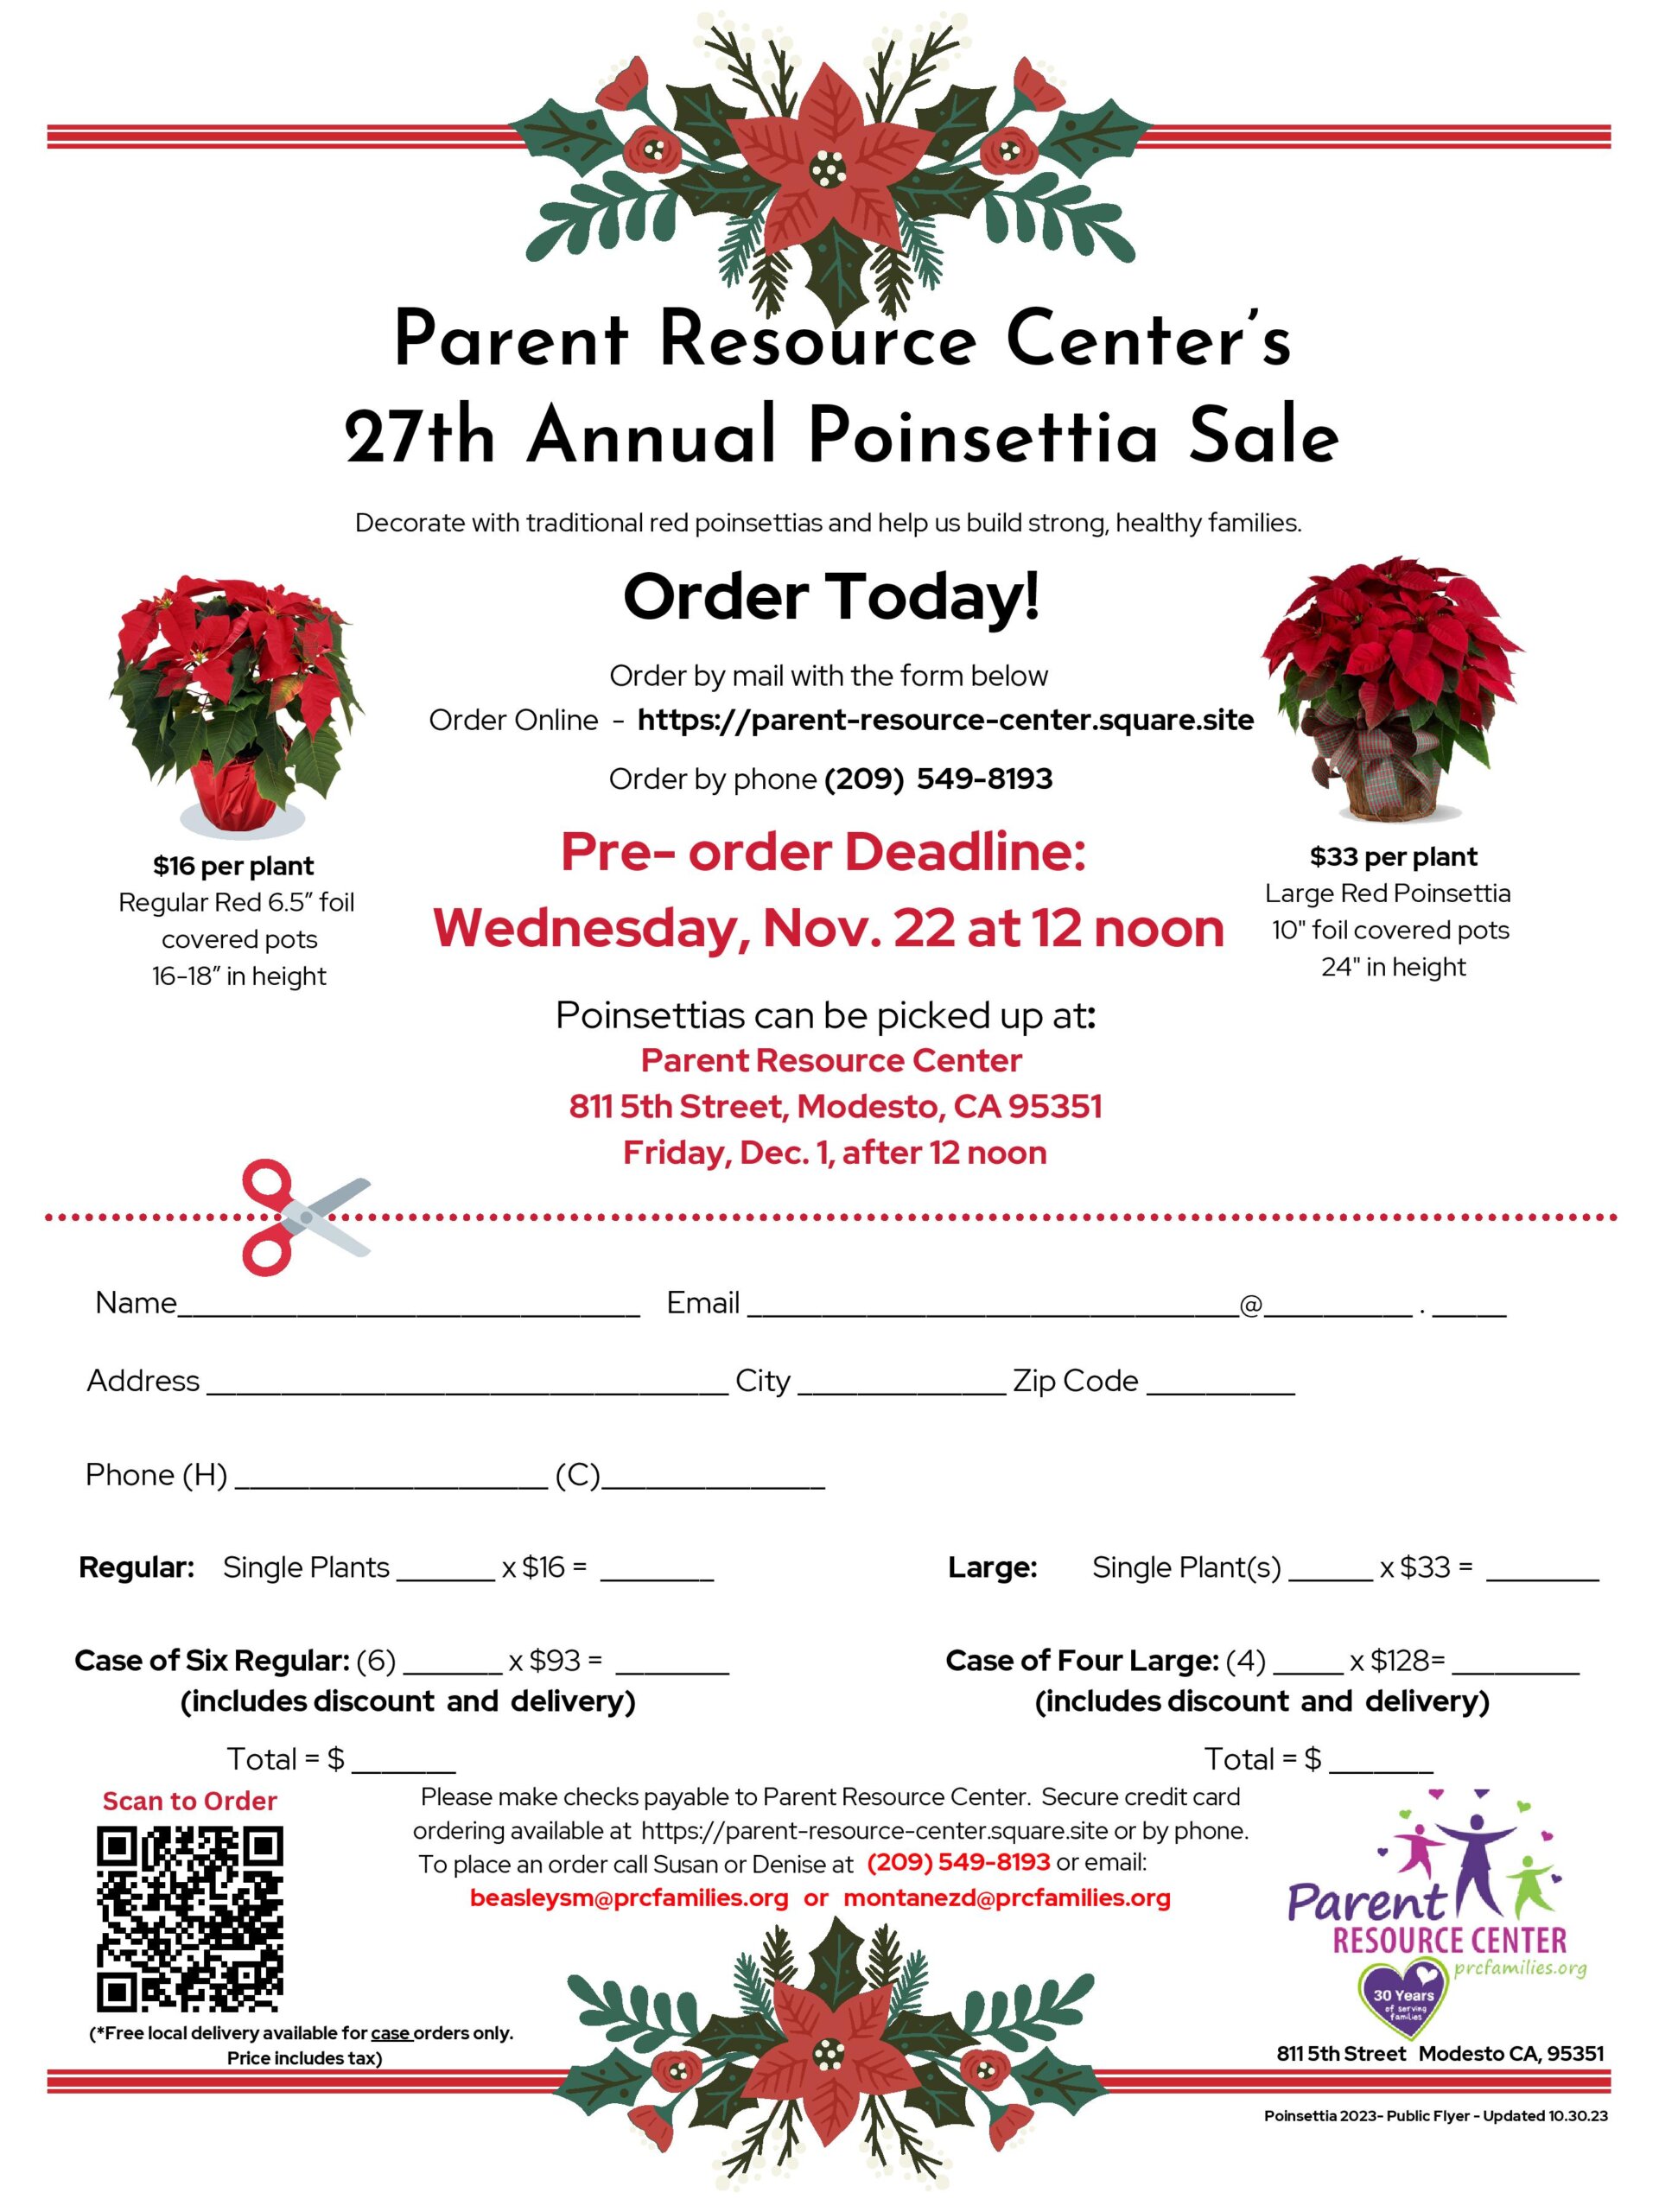 Your Poinsettia Purchase Can Make a Difference